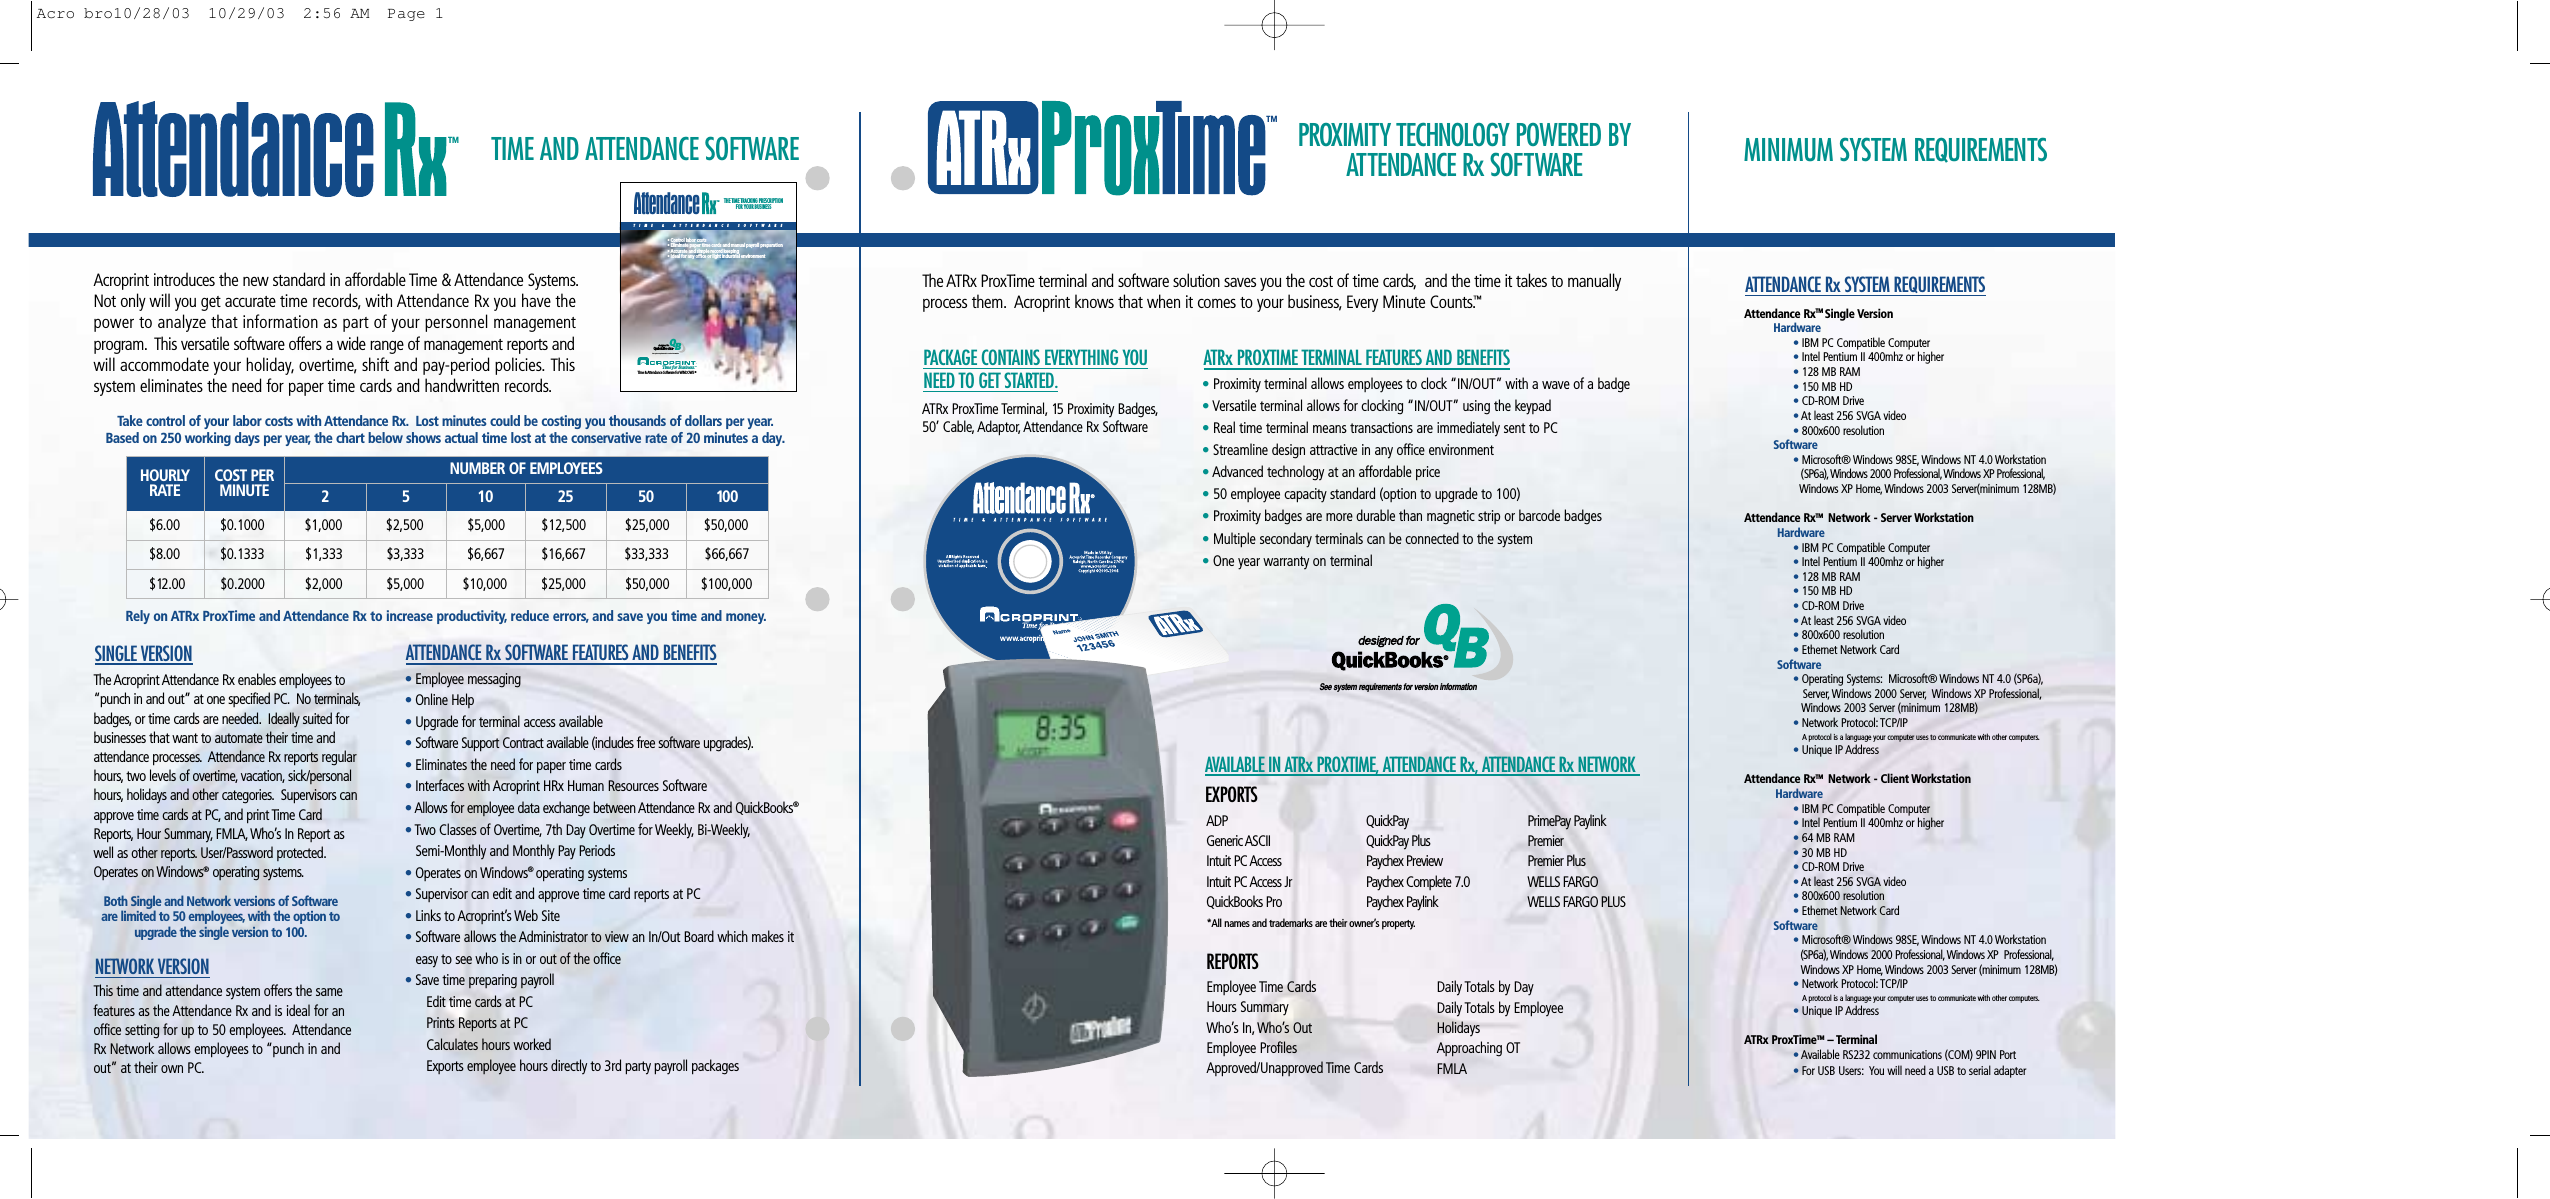 PROXIMITY TECHNOLOGY POWERED BYATTENDANCE Rx SOFTWARETIME AND ATTENDANCE SOFTWARE MINIMUM SYSTEM REQUIREMENTSATRx PROXTIME TERMINAL FEATURES AND BENEFITSATTENDANCE Rx SOFTWARE FEATURES AND BENEFITSSINGLE VERSIONNETWORK VERSIONThe ATRx ProxTime terminal and software solution saves you the cost of time cards, and the time it takes to manuallyprocess them. Acroprint knows that when it comes to your business, Every Minute Counts.™•Proximity terminal allows employees to clock “IN/OUT” with a wave of a badge•Versatile terminal allows for clocking “IN/OUT” using the keypad•Real time terminal means transactions are immediately sent to PC•Streamline design attractive in any office environment•Advanced technology at an affordable price•50 employee capacity standard (option to upgrade to 100)•Proximity badges are more durable than magnetic strip or barcode badges•Multiple secondary terminals can be connected to the system•One year warranty on terminal•Employee messaging•Online Help•Upgrade for terminal access available•Software Support Contract available (includes free software upgrades).•Eliminates the need for paper time cards•Interfaces with Acroprint HRx Human Resources Software•Allows for employee data exchange between Attendance Rx and QuickBooks®•Two Classes of Overtime, 7th Day Overtime for Weekly, Bi-Weekly,Semi-Monthly and Monthly Pay Periods•Operates on Windows®operating systems•Supervisor can edit and approve time card reports at PC•Links to Acroprint’s Web Site•Software allows the Administrator to view an In/Out Board which makes it easy to see who is in or out of the office•Save time preparing payrollEdit time cards at PCPrints Reports at PCCalculates hours workedExports employee hours directly to 3rd party payroll packagesATRx ProxTime Terminal, 15 Proximity Badges,50’ Cable, Adaptor, Attendance Rx SoftwarePACKAGE CONTAINS EVERYTHING YOUNEED TO GET STARTED.The Acroprint Attendance Rx enables employees to“punch in and out” at one specified PC. No terminals,badges, or time cards are needed. Ideally suited forbusinesses that want to automate their time andattendance processes. Attendance Rx reports regularhours, two levels of overtime, vacation, sick/personalhours, holidays and other categories. Supervisors canapprove time cards at PC, and print Time CardReports, Hour Summary, FMLA, Who’s In Report aswell as other reports. User/Password protected.Operates on Windows®operating systems.Both Single and Network versions of Softwareare limited to 50 employees, with the option toupgrade the single version to 100.ATTENDANCE Rx SYSTEM REQUIREMENTSADPGeneric ASCIIIntuit PC AccessIntuit PC Access Jr QuickBooks ProQuickPayQuickPay PlusPaychex PreviewPaychex Complete 7.0Paychex PaylinkPrimePay PaylinkPremierPremier PlusWELLS FARGOWELLS FARGO PLUSEmployee Time CardsHours SummaryWho’s In, Who’s OutEmployee ProfilesApproved/Unapproved Time CardsDaily Totals by DayDaily Totals by EmployeeHolidaysApproaching OTFMLAAVAILABLE IN ATRx PROXTIME, ATTENDANCE Rx, ATTENDANCE Rx NETWORKEXPORTSREPORTSThis time and attendance system offers the samefeatures as the Attendance Rx and is ideal for anoffice setting for up to 50 employees. AttendanceRx Network allows employees to “punch in andout” at their own PC.See system requirements for version information*All names and trademarks are their owner’s property.Acroprint introduces the new standard in affordable Time &amp; Attendance Systems.Not only will you get accurate time records, with Attendance Rx you have thepower to analyze that information as part of your personnel management program. This versatile software offers a wide range of management reports andwill accommodate your holiday, overtime, shift and pay-period policies. This system eliminates the need for paper time cards and handwritten records.Take control of your labor costs with Attendance Rx. Lost minutes could be costing you thousands of dollars per year.Based on 250 working days per year, the chart below shows actual time lost at the conservative rate of 20 minutes a day.Attendance RxTM Single VersionHardware• IBM PC Compatible Computer• Intel Pentium II 400mhz or higher• 128 MB RAM• 150 MB HD• CD-ROM Drive• At least 256 SVGA video• 800x600 resolution Software• Microsoft® Windows 98SE,Windows NT 4.0 Workstation (SP6a),Windows 2000 Professional, Windows XP Professional,Windows XP Home,Windows 2003 Server(minimum 128MB)Attendance RxTM  Network - Server WorkstationHardware•IBM PC Compatible Computer• Intel Pentium II 400mhz or higher•128 MB RAM• 150 MB HD•CD-ROM Drive•At least 256 SVGA video• 800x600 resolution • Ethernet Network CardSoftware• Operating Systems: Microsoft® Windows NT 4.0 (SP6a),Server, Windows 2000 Server, Windows XP Professional,Windows 2003 Server (minimum 128MB)• Network Protocol: TCP/IPA protocol is a language your computer uses to communicate with other computers.• Unique IP AddressAttendance RxTM  Network - Client WorkstationHardware• IBM PC Compatible Computer• Intel Pentium II 400mhz or higher• 64 MB RAM• 30 MB HD• CD-ROM Drive• At least 256 SVGA video• 800x600 resolution • Ethernet Network CardSoftware• Microsoft® Windows 98SE,Windows NT 4.0 Workstation (SP6a), Windows 2000 Professional, Windows XP  Professional,Windows XP Home,Windows 2003 Server (minimum 128MB)•Network Protocol: TCP/IPA protocol is a language your computer uses to communicate with other computers.• Unique IP AddressATRx ProxTimeTM – Terminal • Available RS232 communications (COM) 9PIN Port• For USB Users: You will need a USB to serial adapterRely on ATRx ProxTime and Attendance Rx to increase productivity, reduce errors, and save you time and money.HOURLYRATE COST PERMINUTE 2 5 10 25 50 100NUMBER OF EMPLOYEES$6.00           $0.1000           $1,000            $2,500            $5,000          $12,500   $25,000         $50,000$8.00           $0.1333          $1,333            $3,333            $6,667          $16,667           $33,333        $66,667  $12.00          $0.2000           $2,000            $5,000          $10,000         $25,000      $50,000       $100,000 TIME &amp; ATTENDANCE SOFTWARE• Control labor costs• Eliminate paper time cards and manual payroll preparation• Accurate and simple record keeping• Ideal for any office or light industrial environmentTHE TIME TRACKING PRESCRIPTIONFOR YOUR BUSINESSAttendanceTime for Business.TMTime &amp; Attendance Software for WINDOWSBQ®designed fordesigned forQuickBooksSee system requirements for version information®TMTMTMAcro bro10/28/03  10/29/03  2:56 AM  Page 1